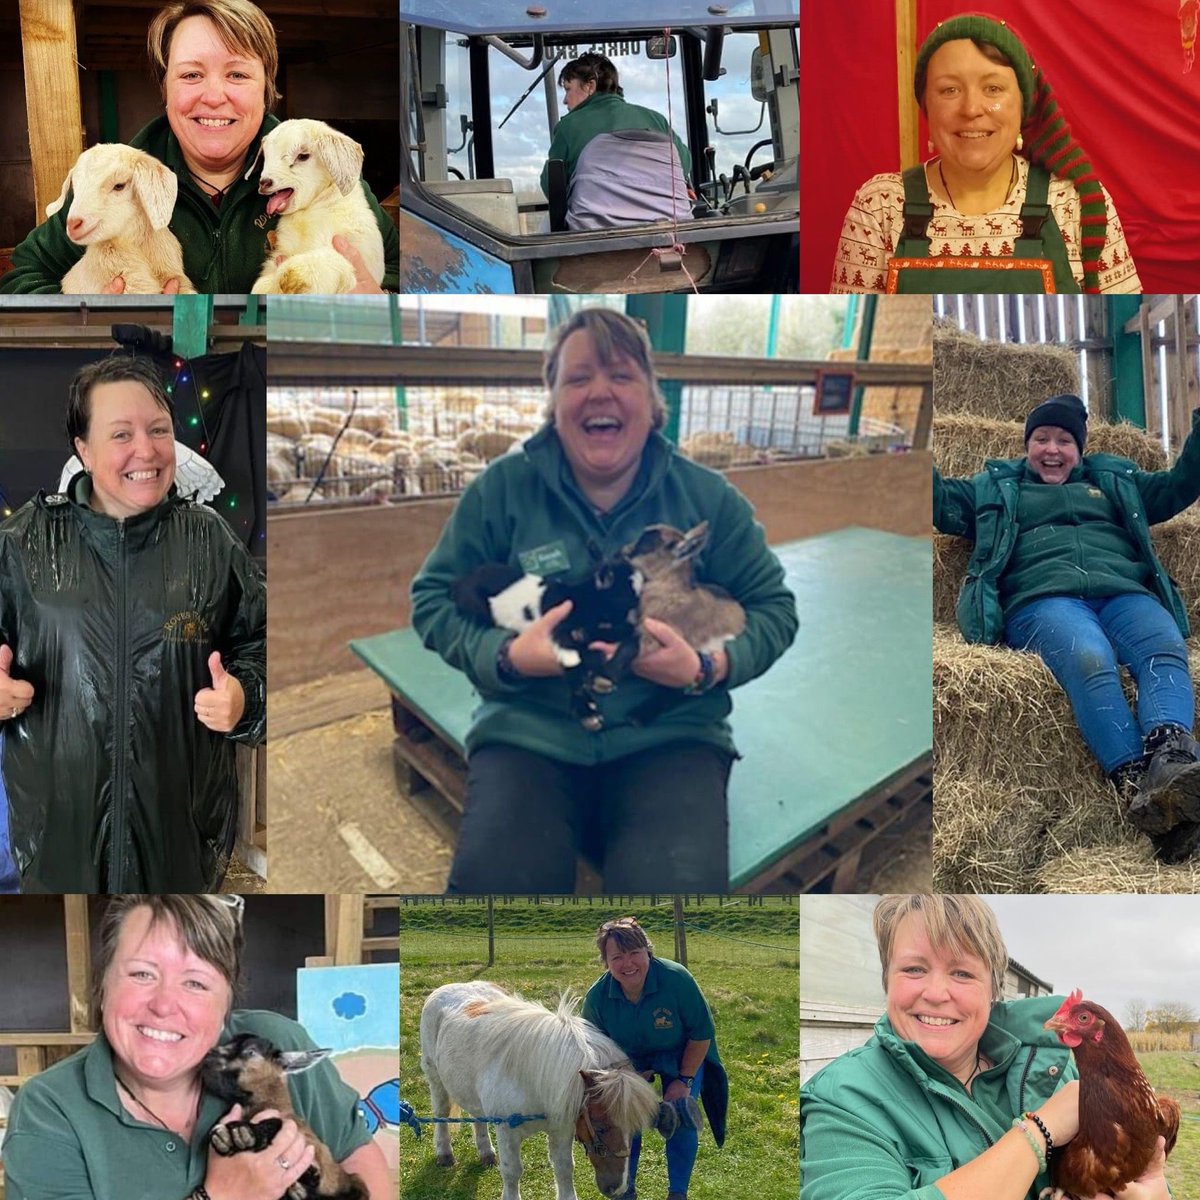 Today we say farewell to Sarah, who has been part of our Activities Team since Dec. 21. Sarah's love of animals & people always shines through. She will be greatly missed by us all here, as well as by many of our visitors who have benefitted from her energy & sense of fun. 🥰